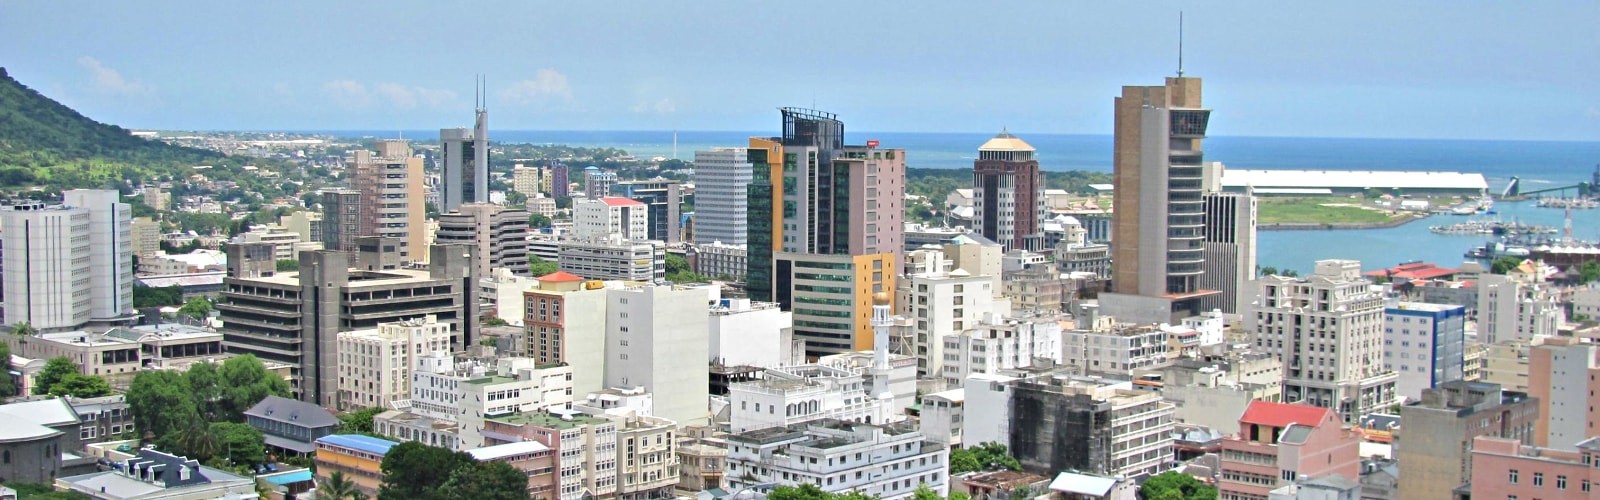 Mauritius commercial bank limited